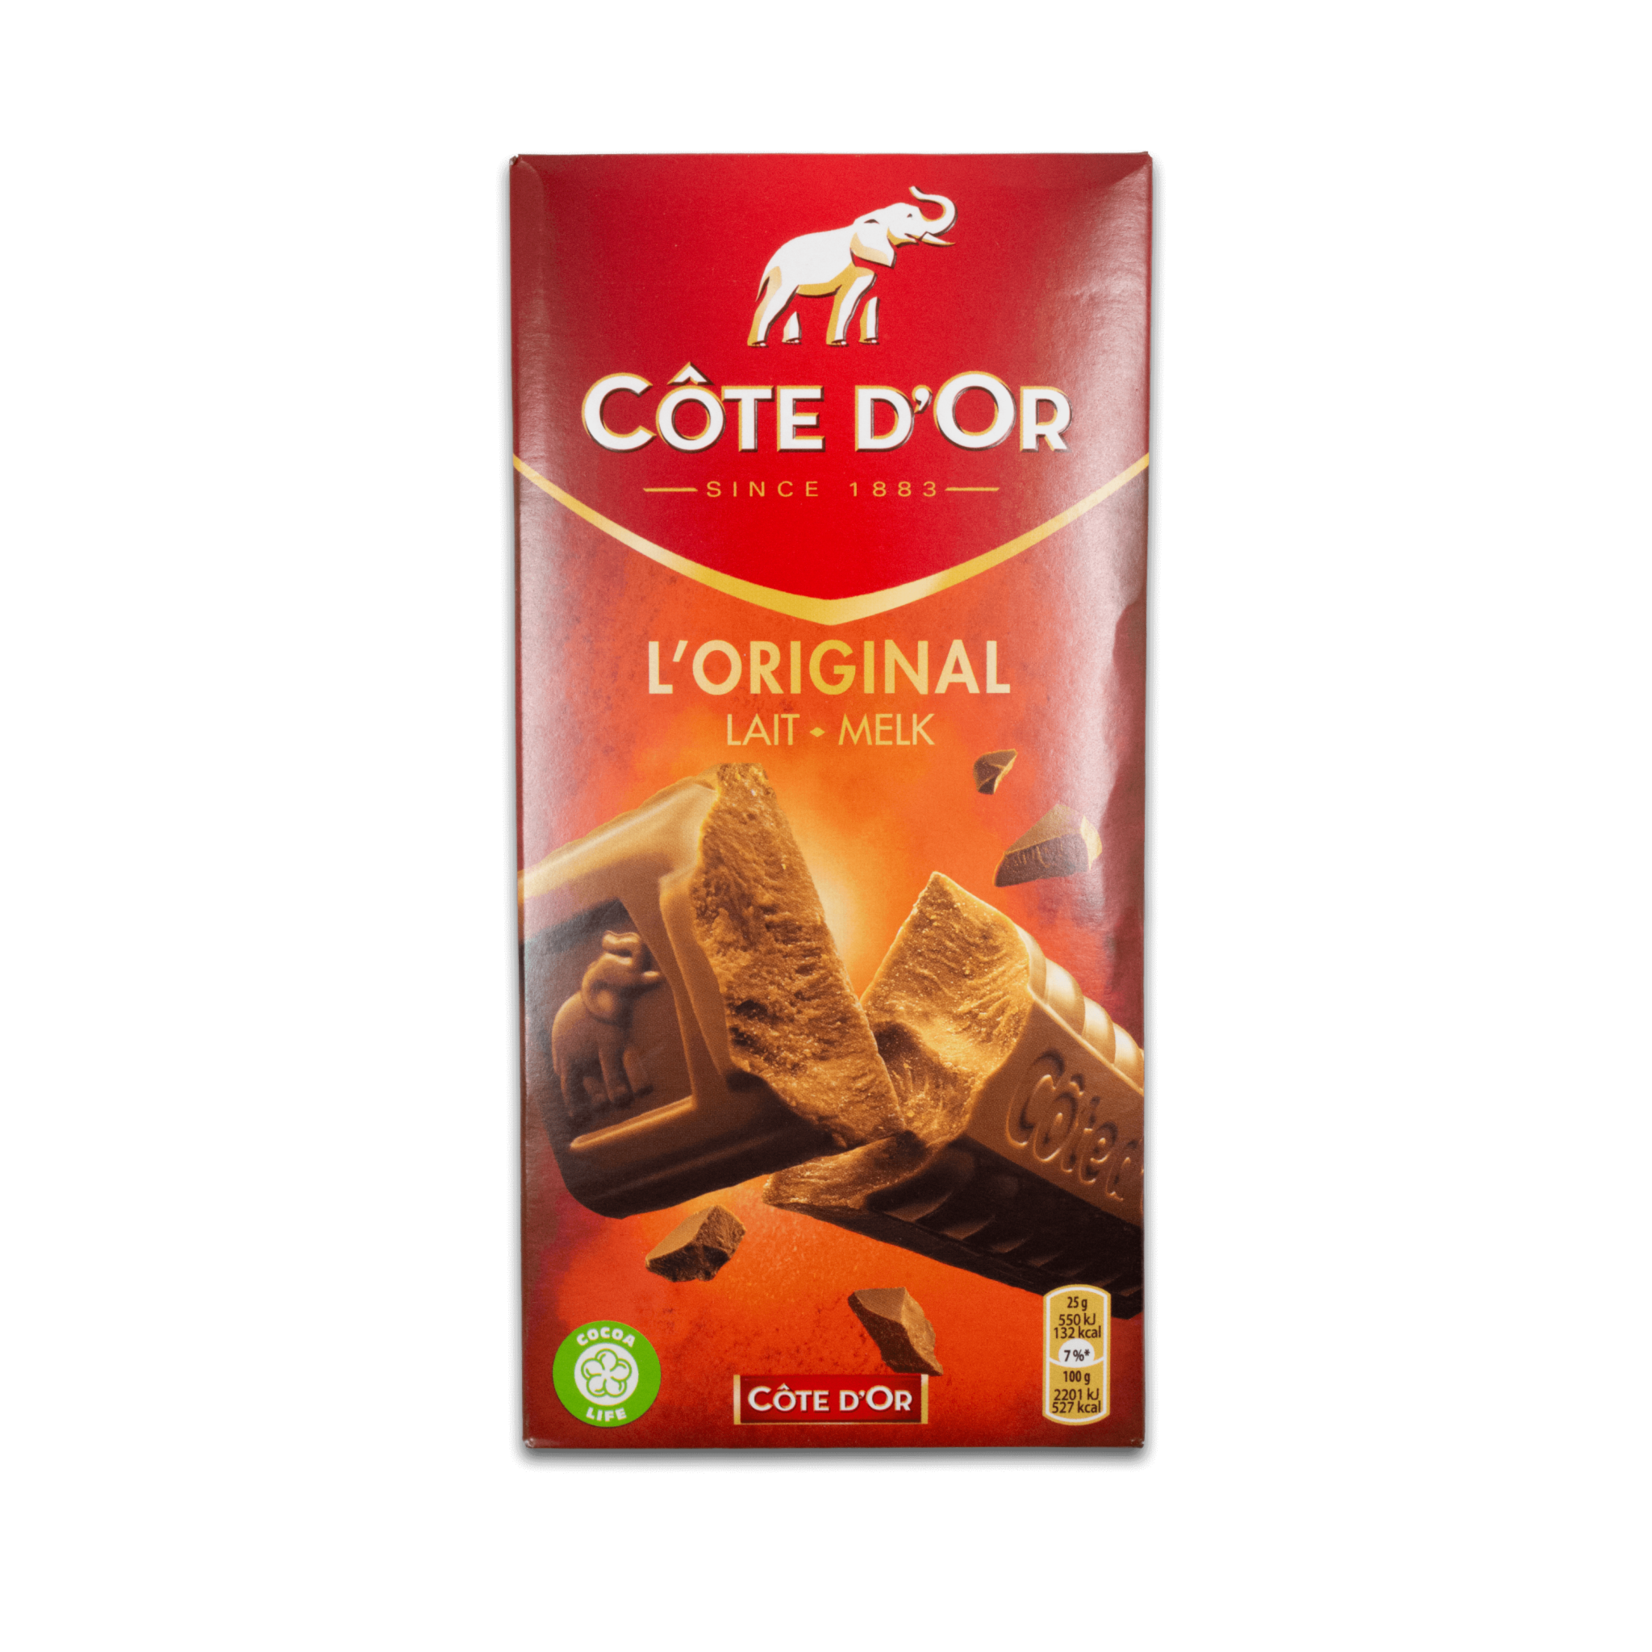 Cote D'Or Cote D'Or Milk Chocolate 200g